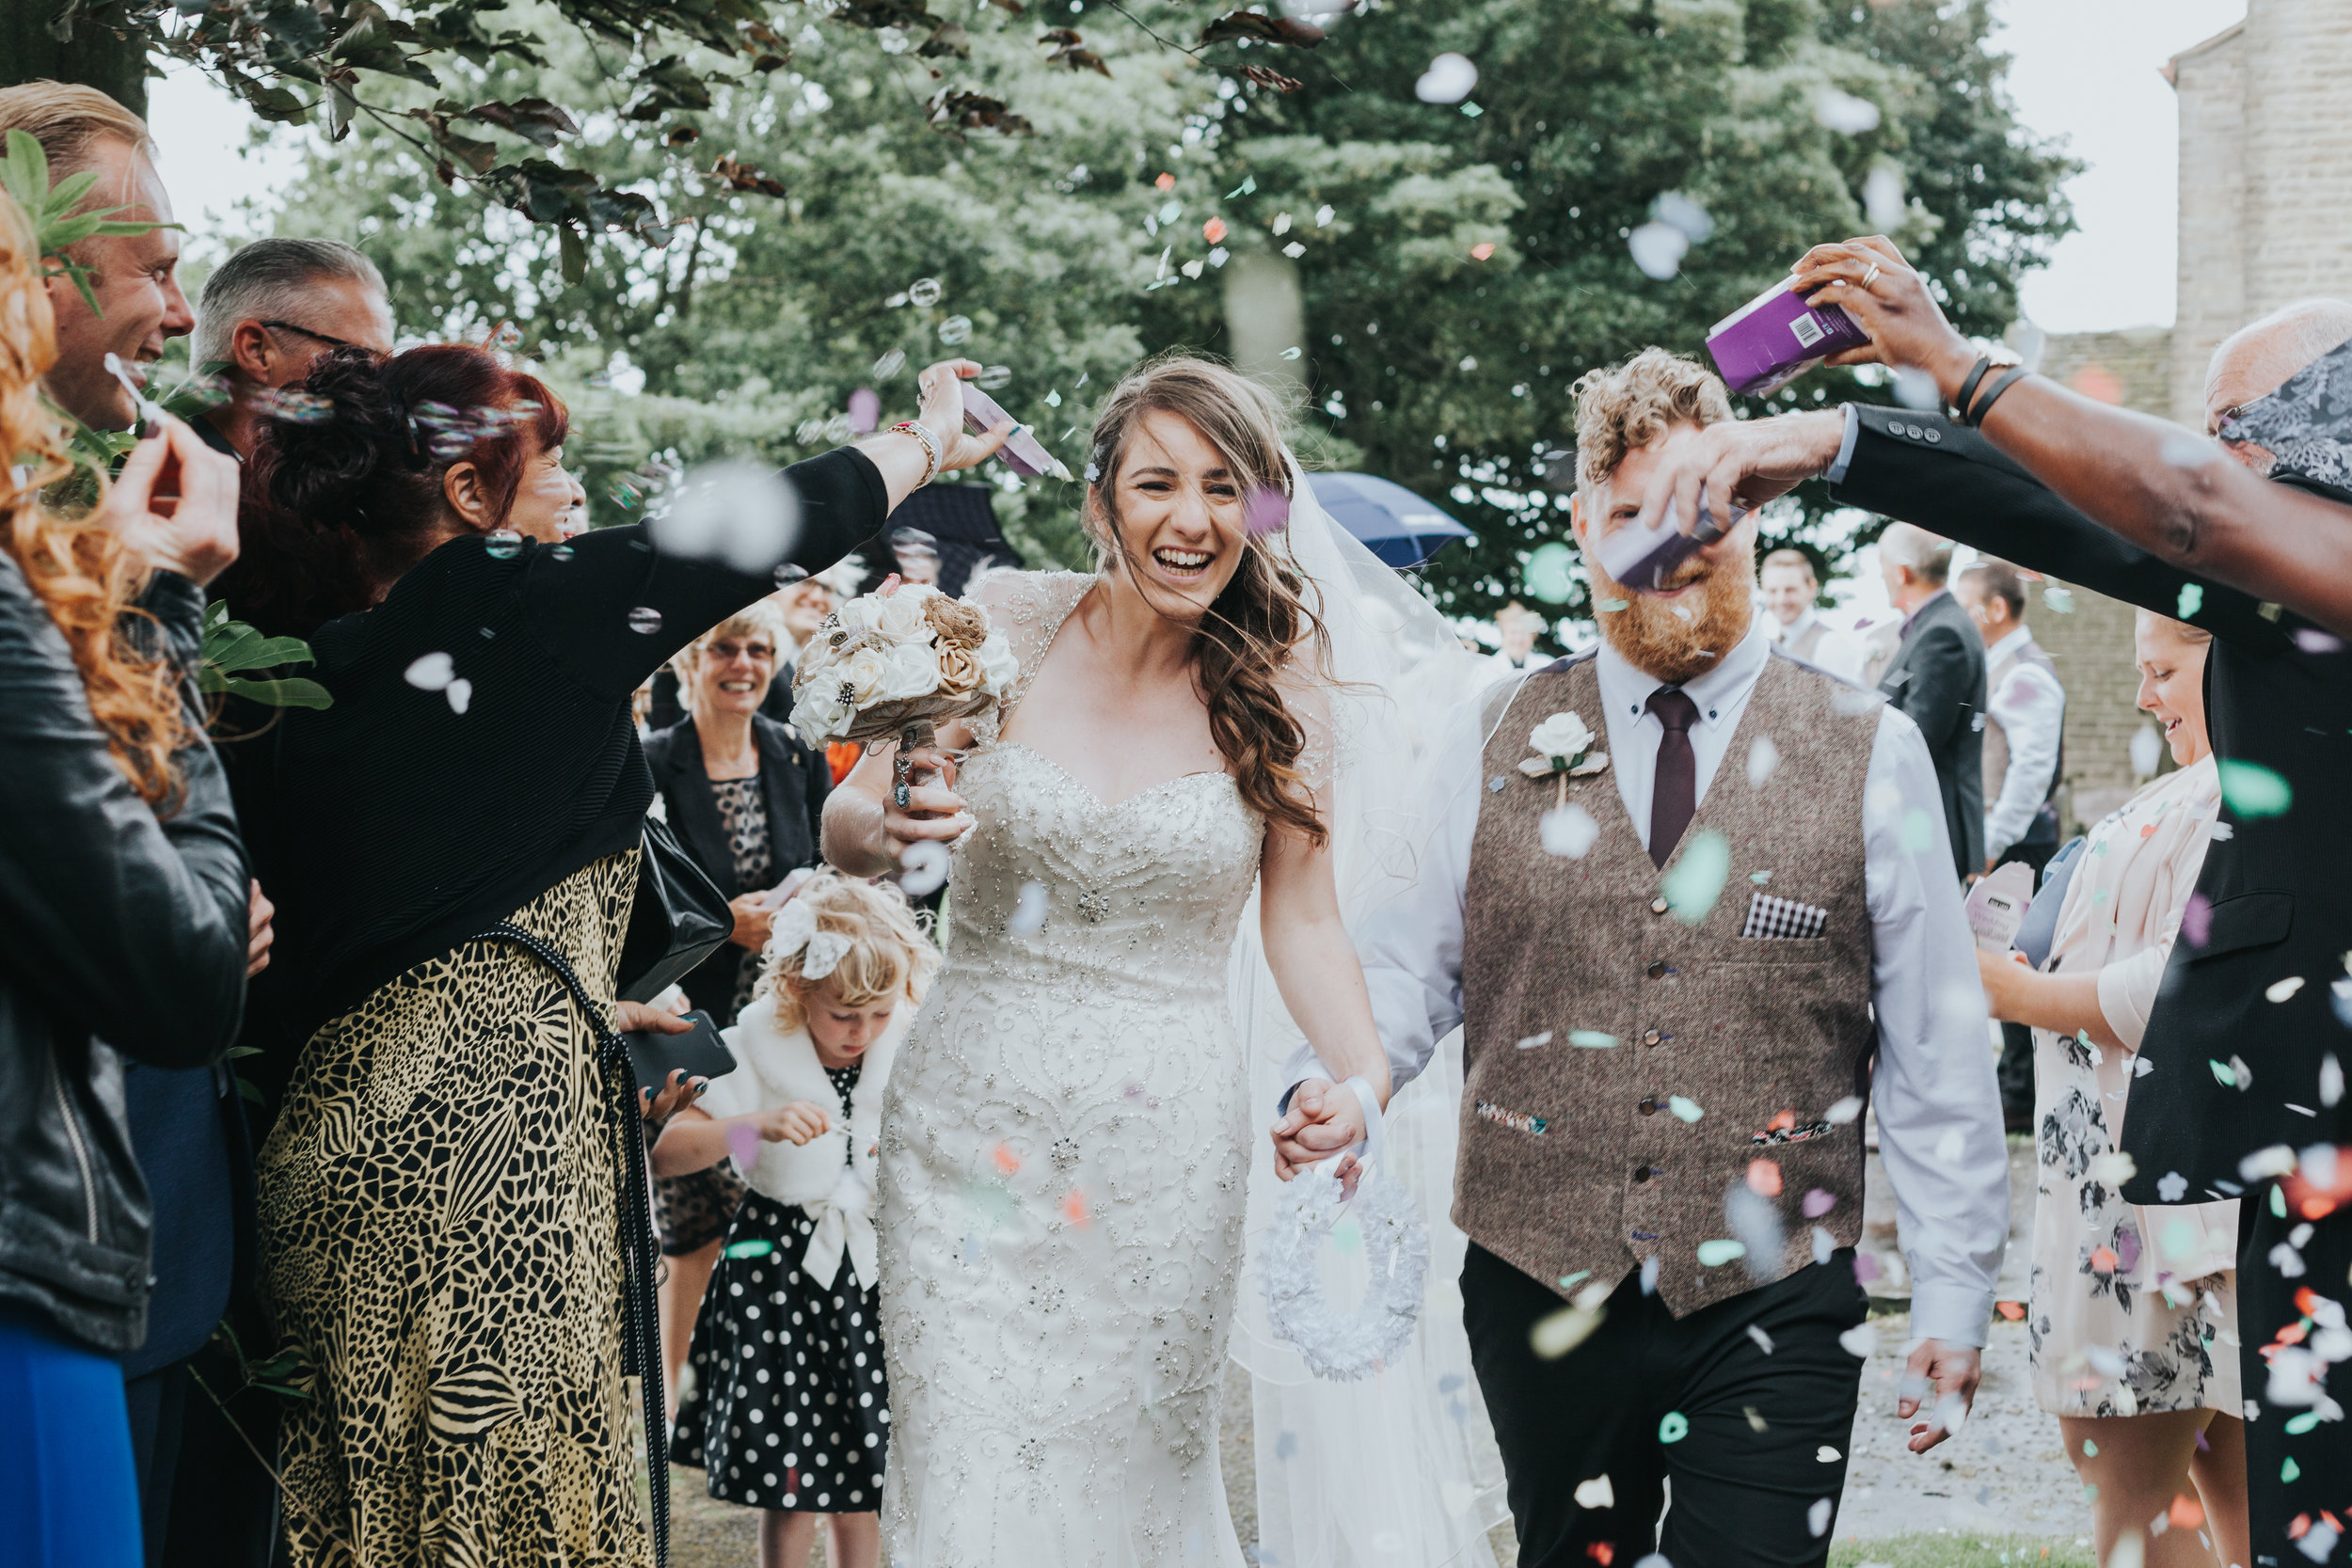  New Weds are attacked with confetti.&nbsp; 